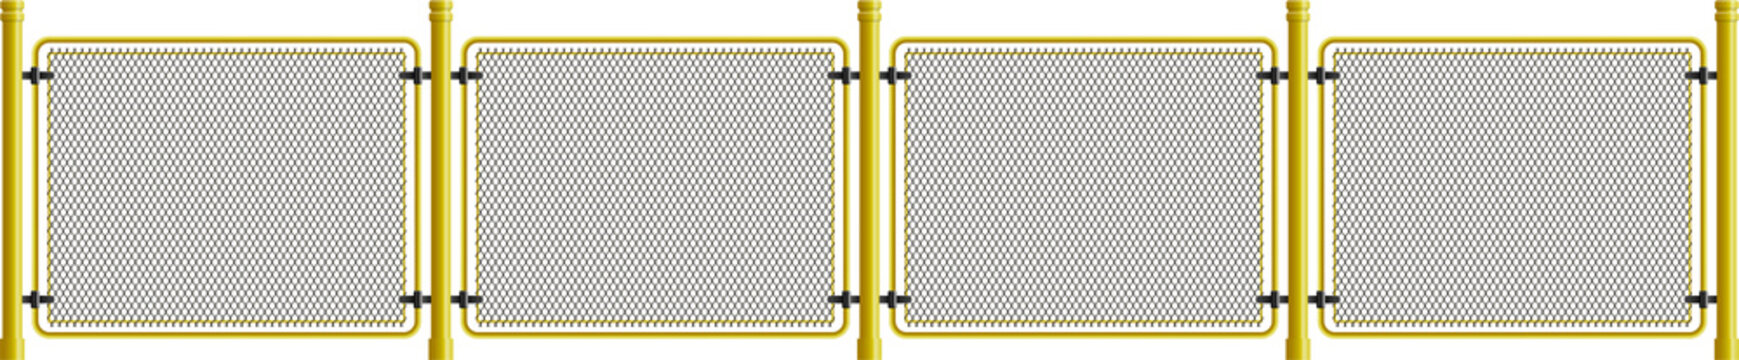 Metal wire fence and gate clip art